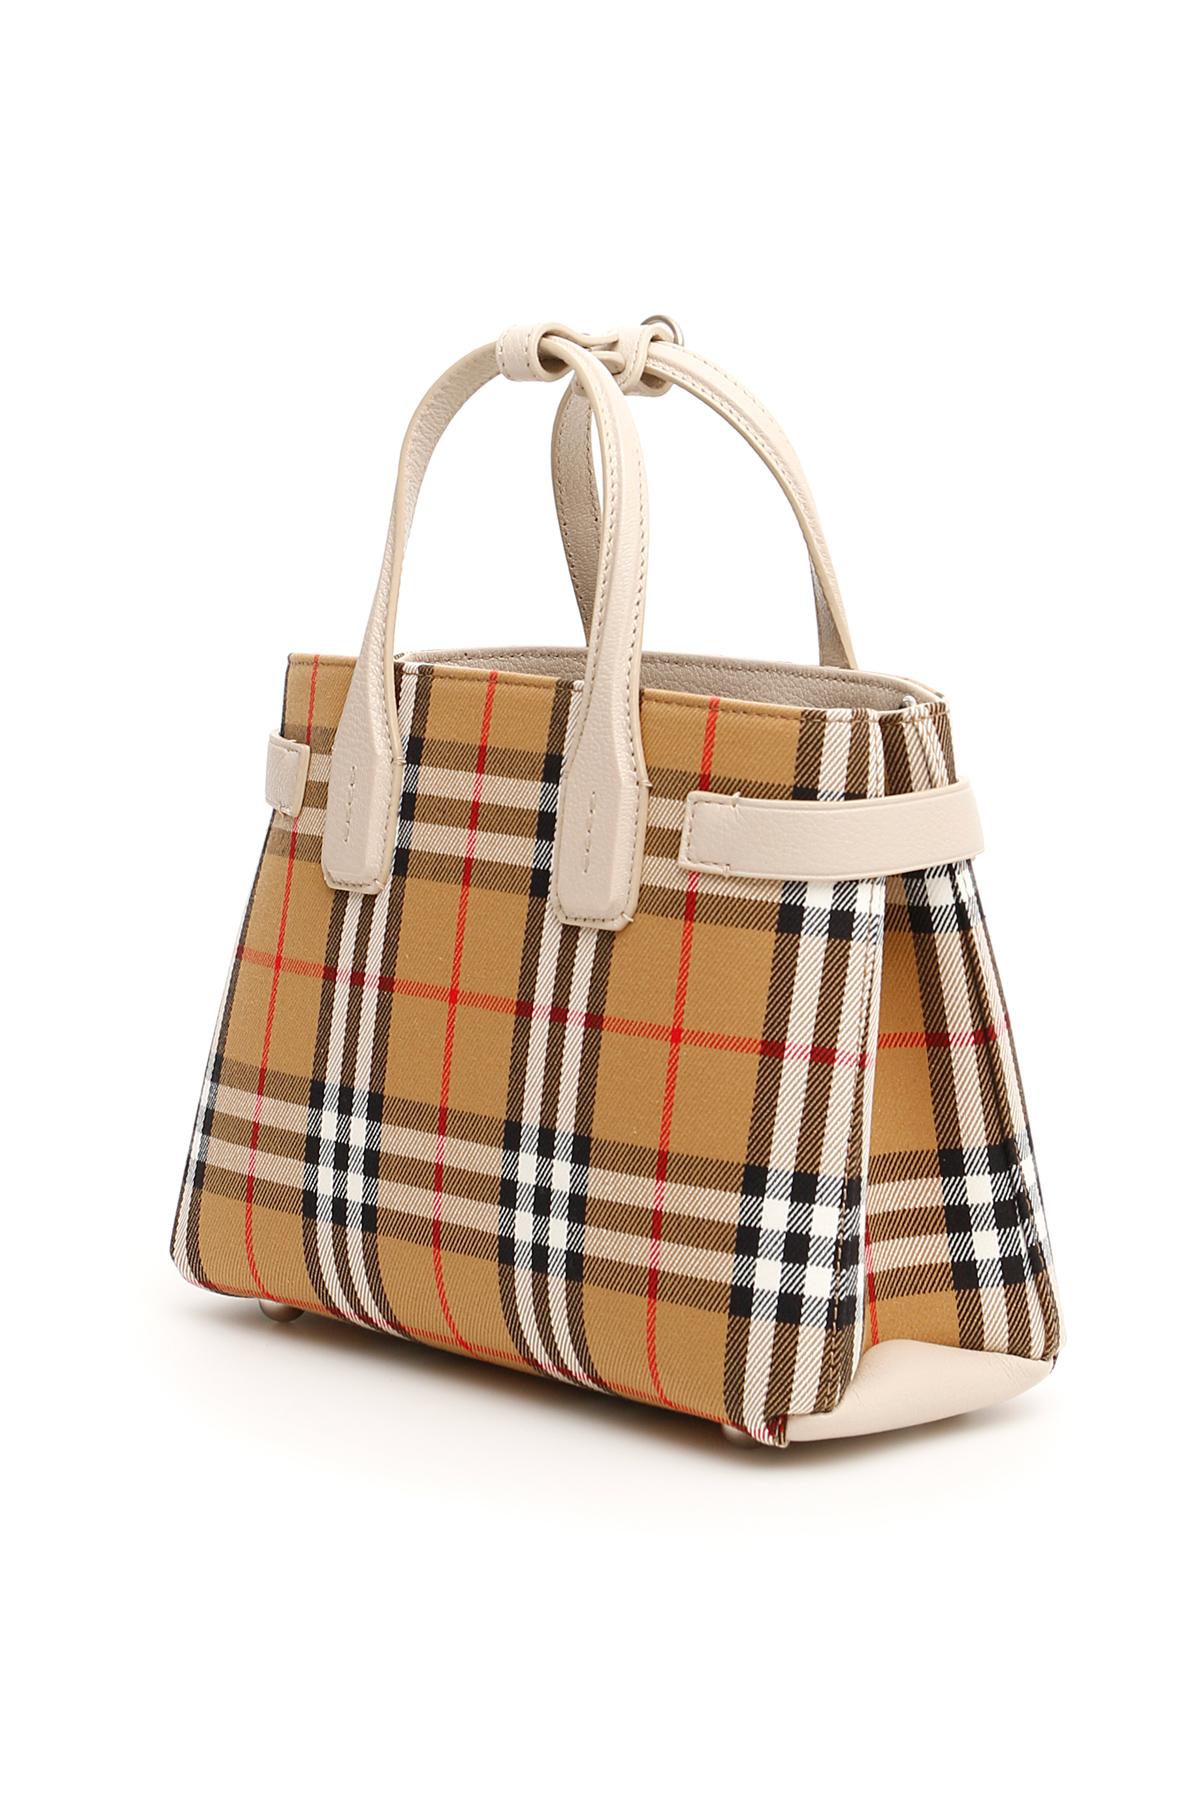 Burberry Small Banner Bag in Red - Lyst